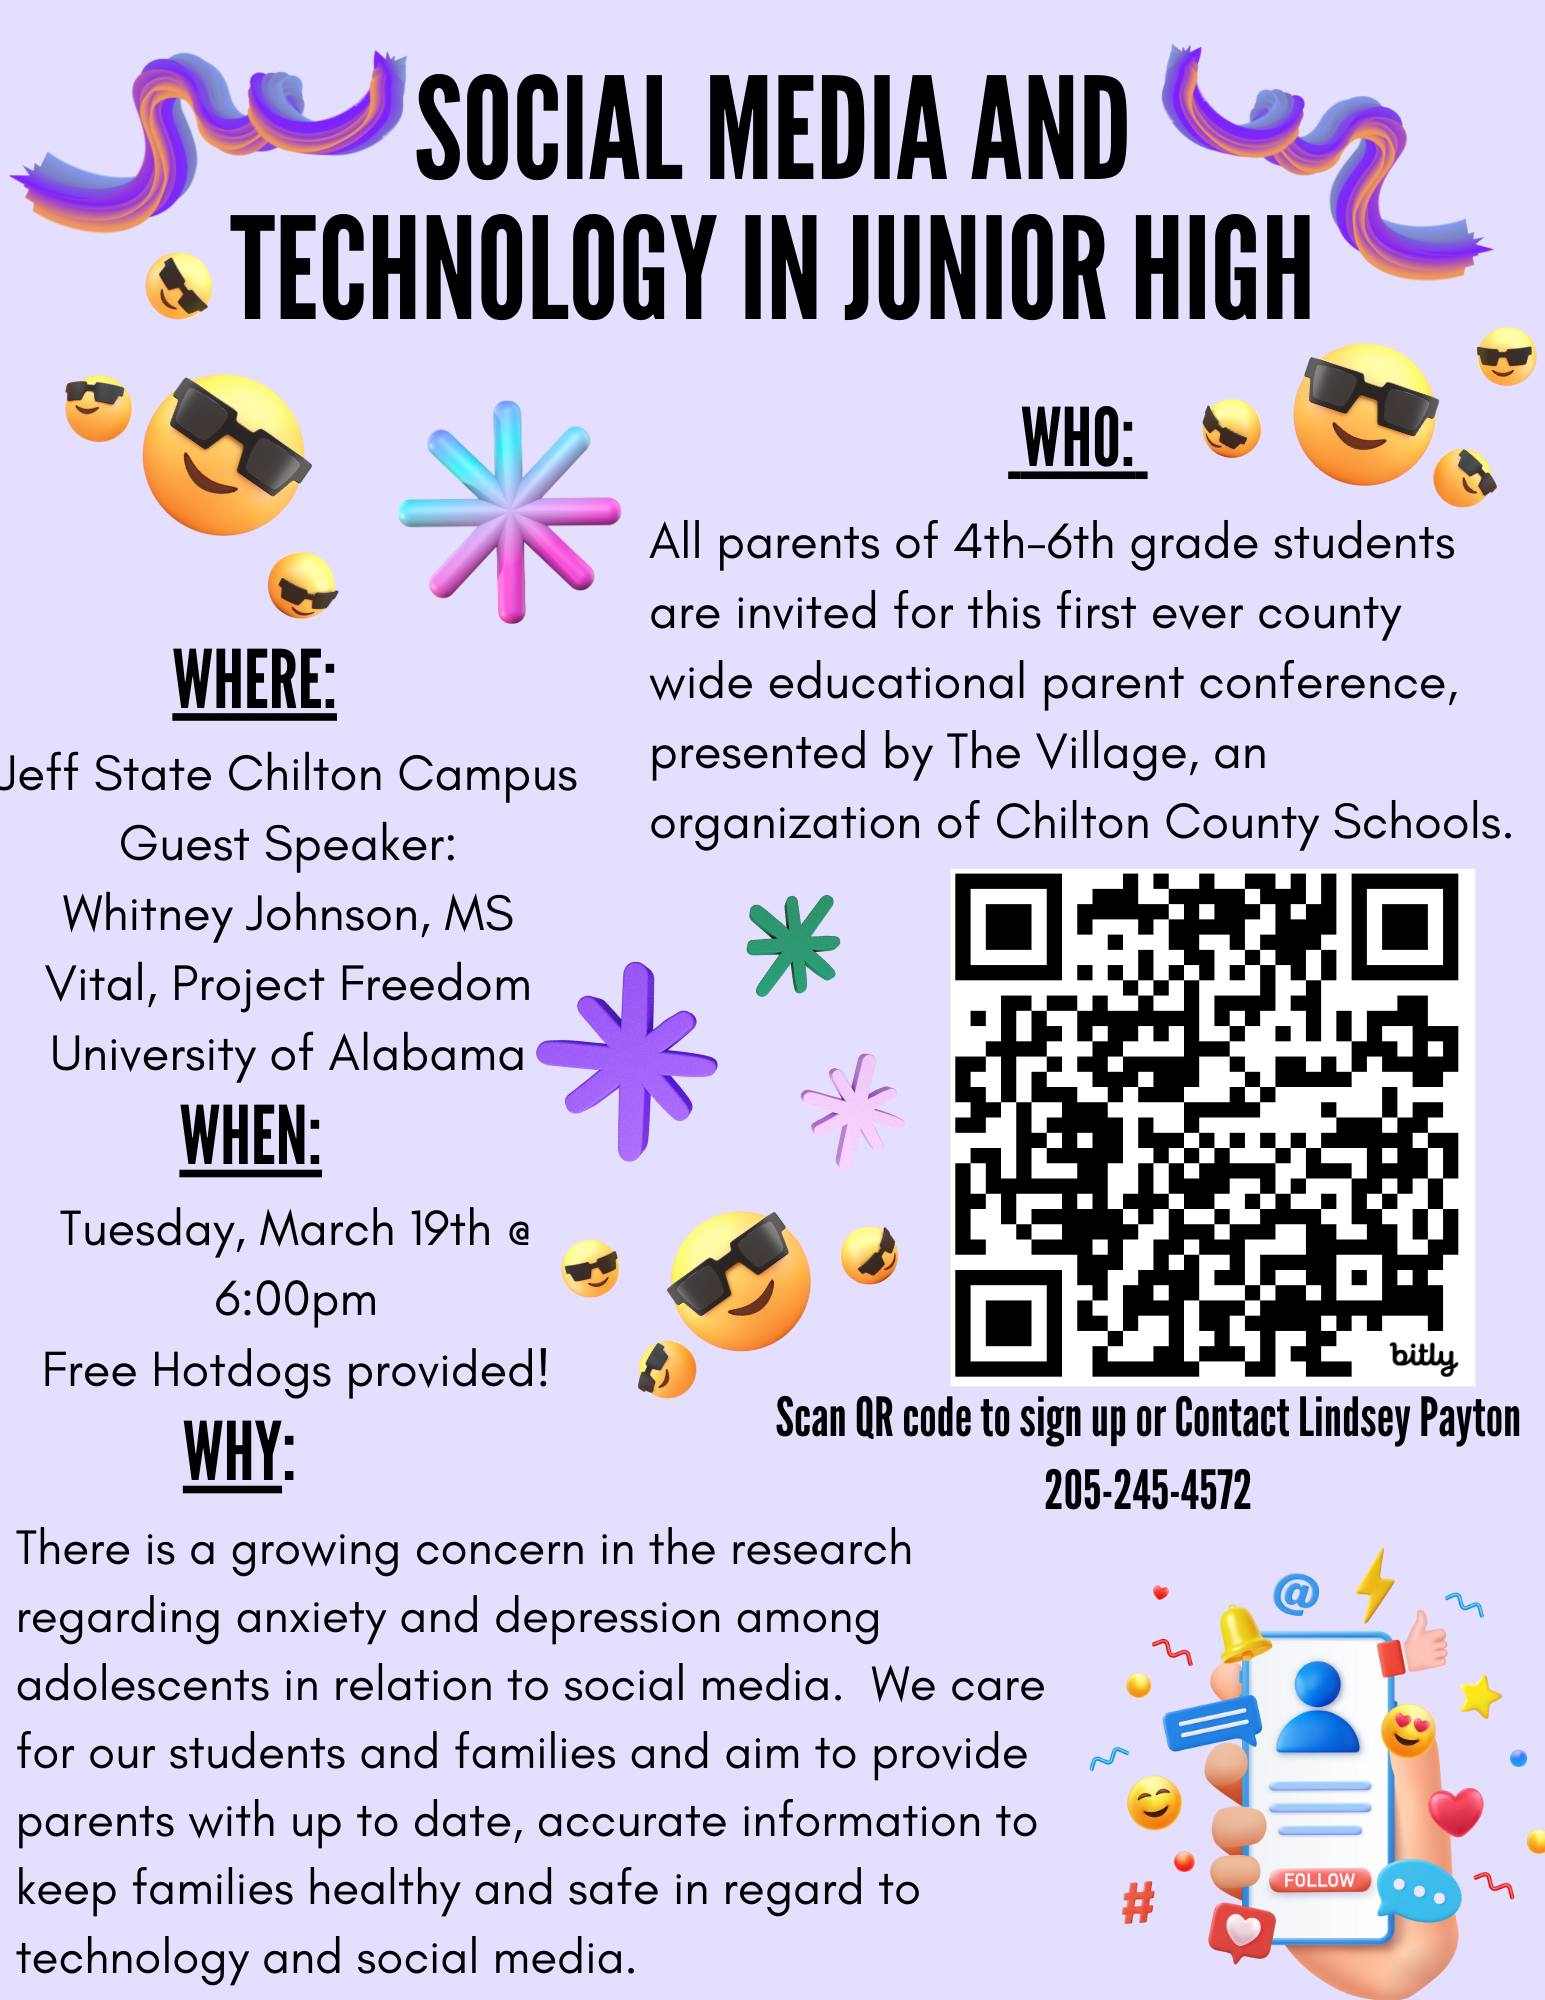 Social Media & Technology Use Awareness Event Flyer for Parents & 4th-6th Grade Students